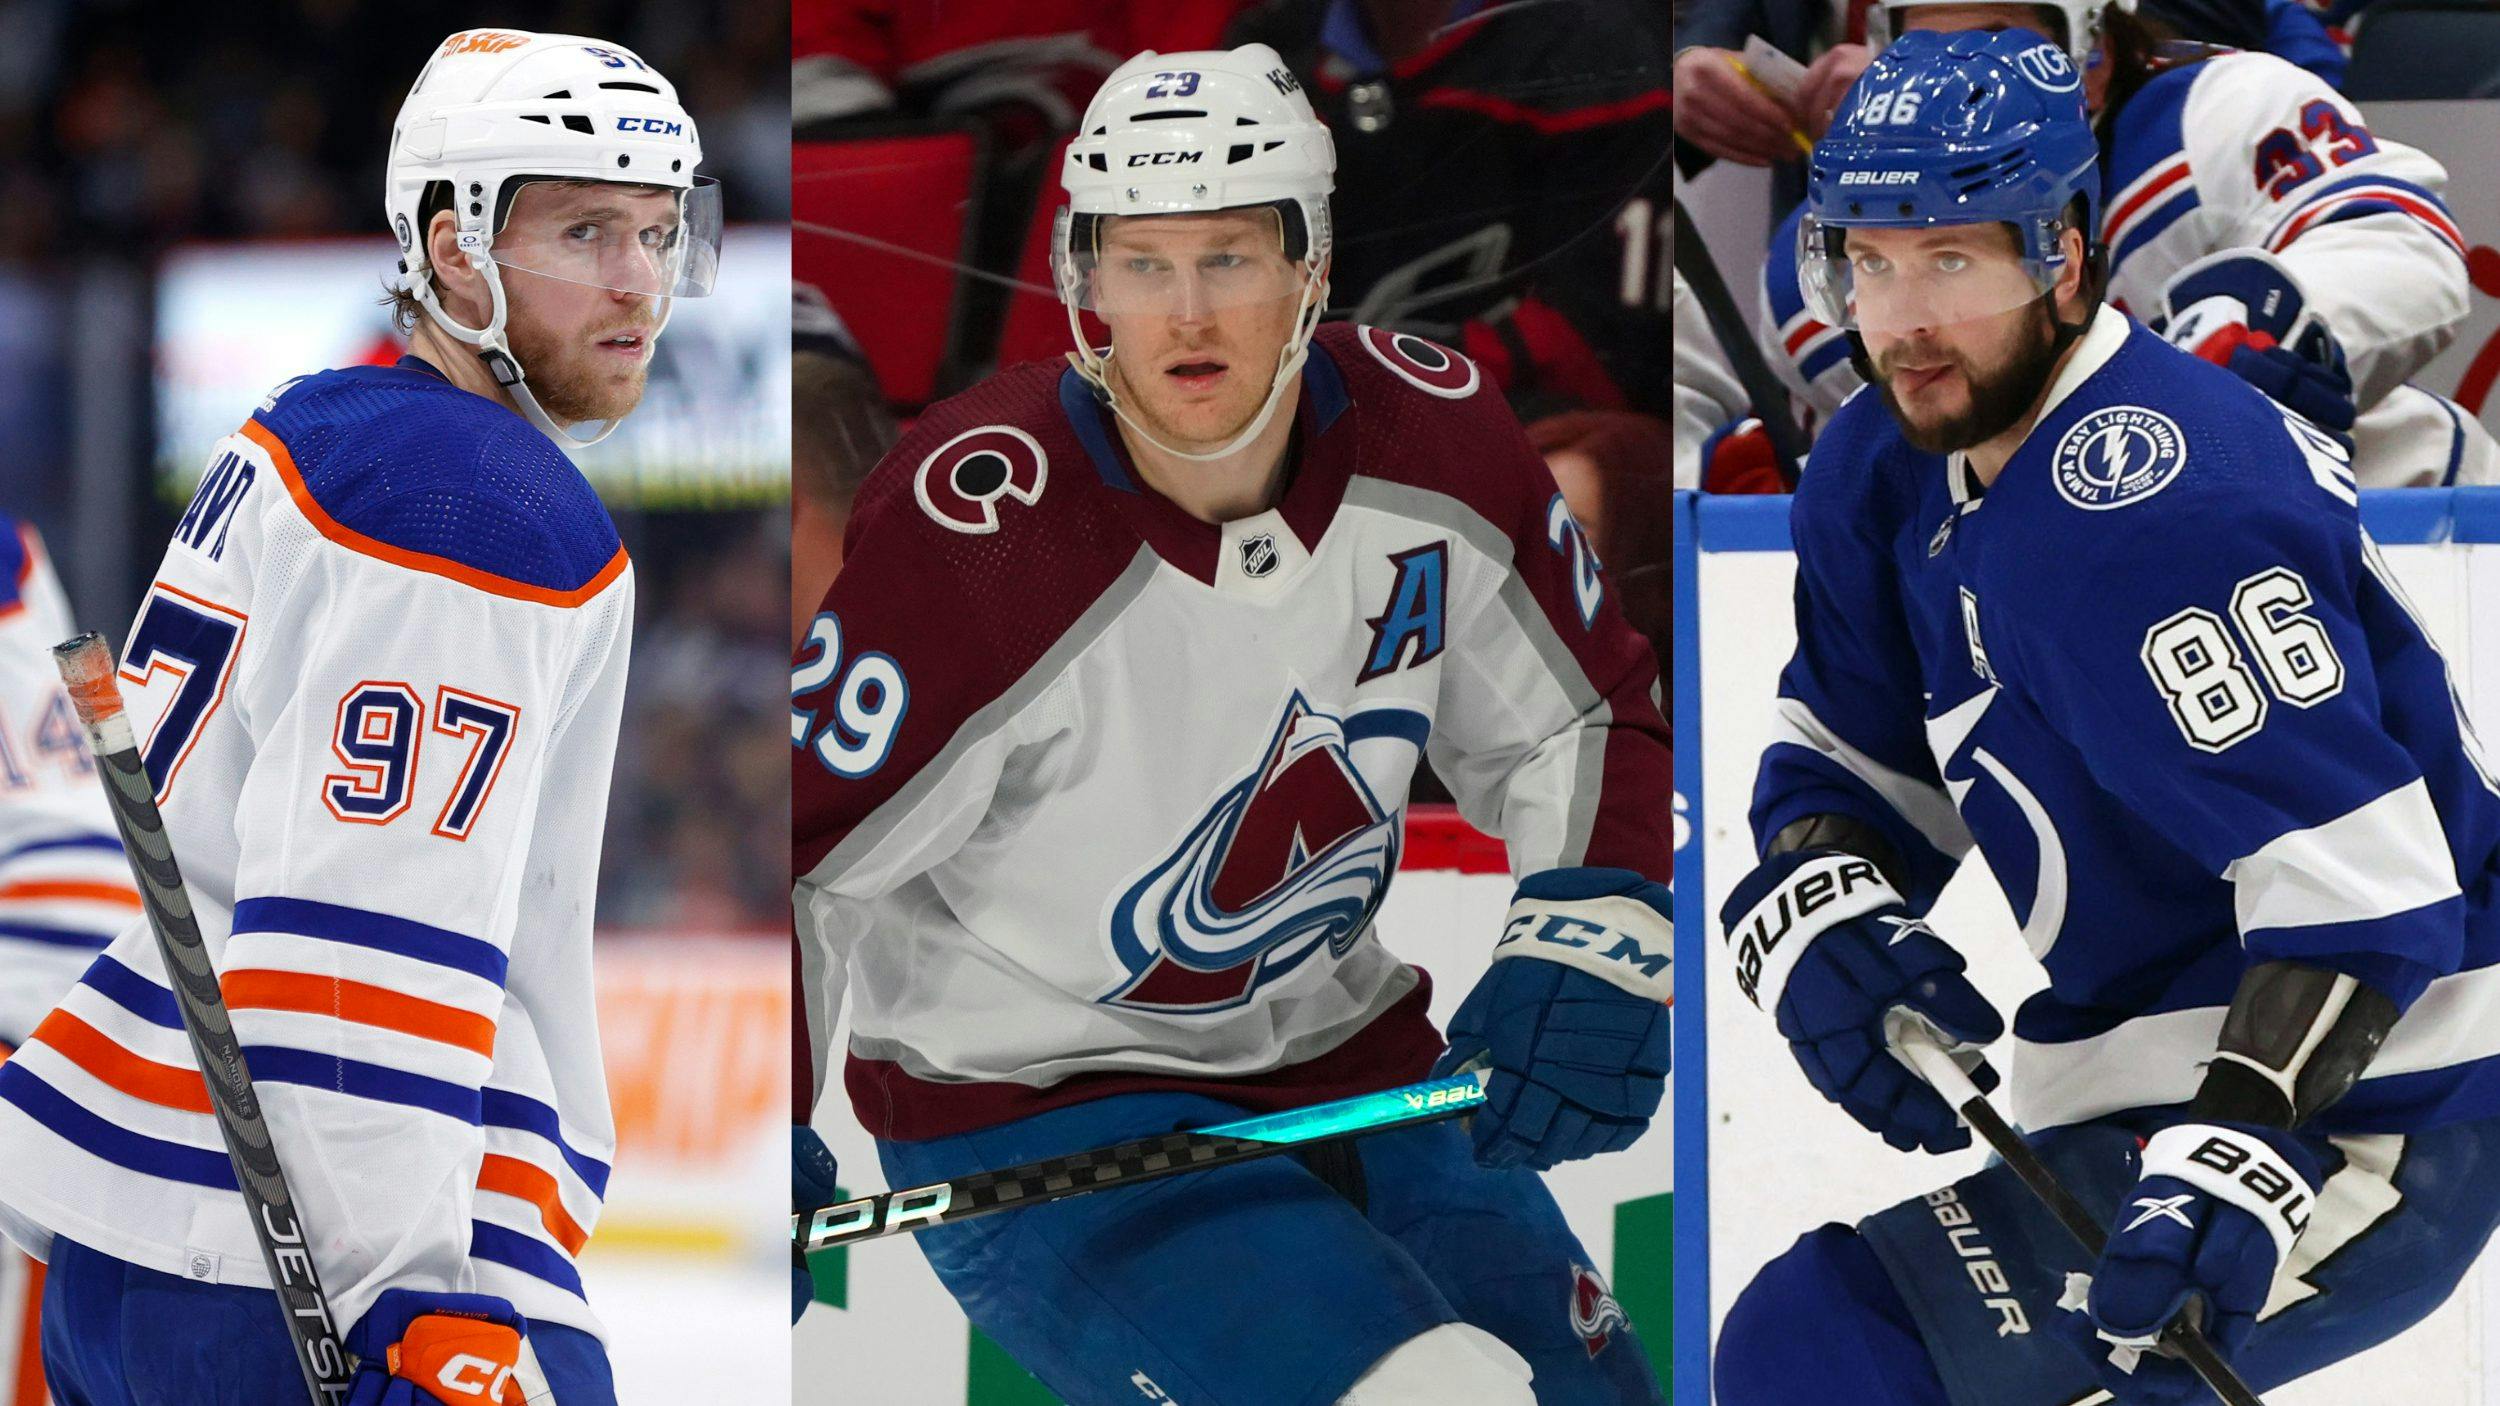 The Art Ross Trophy Race: Who’s (Actually) Been the NHL’s Best Scorer?